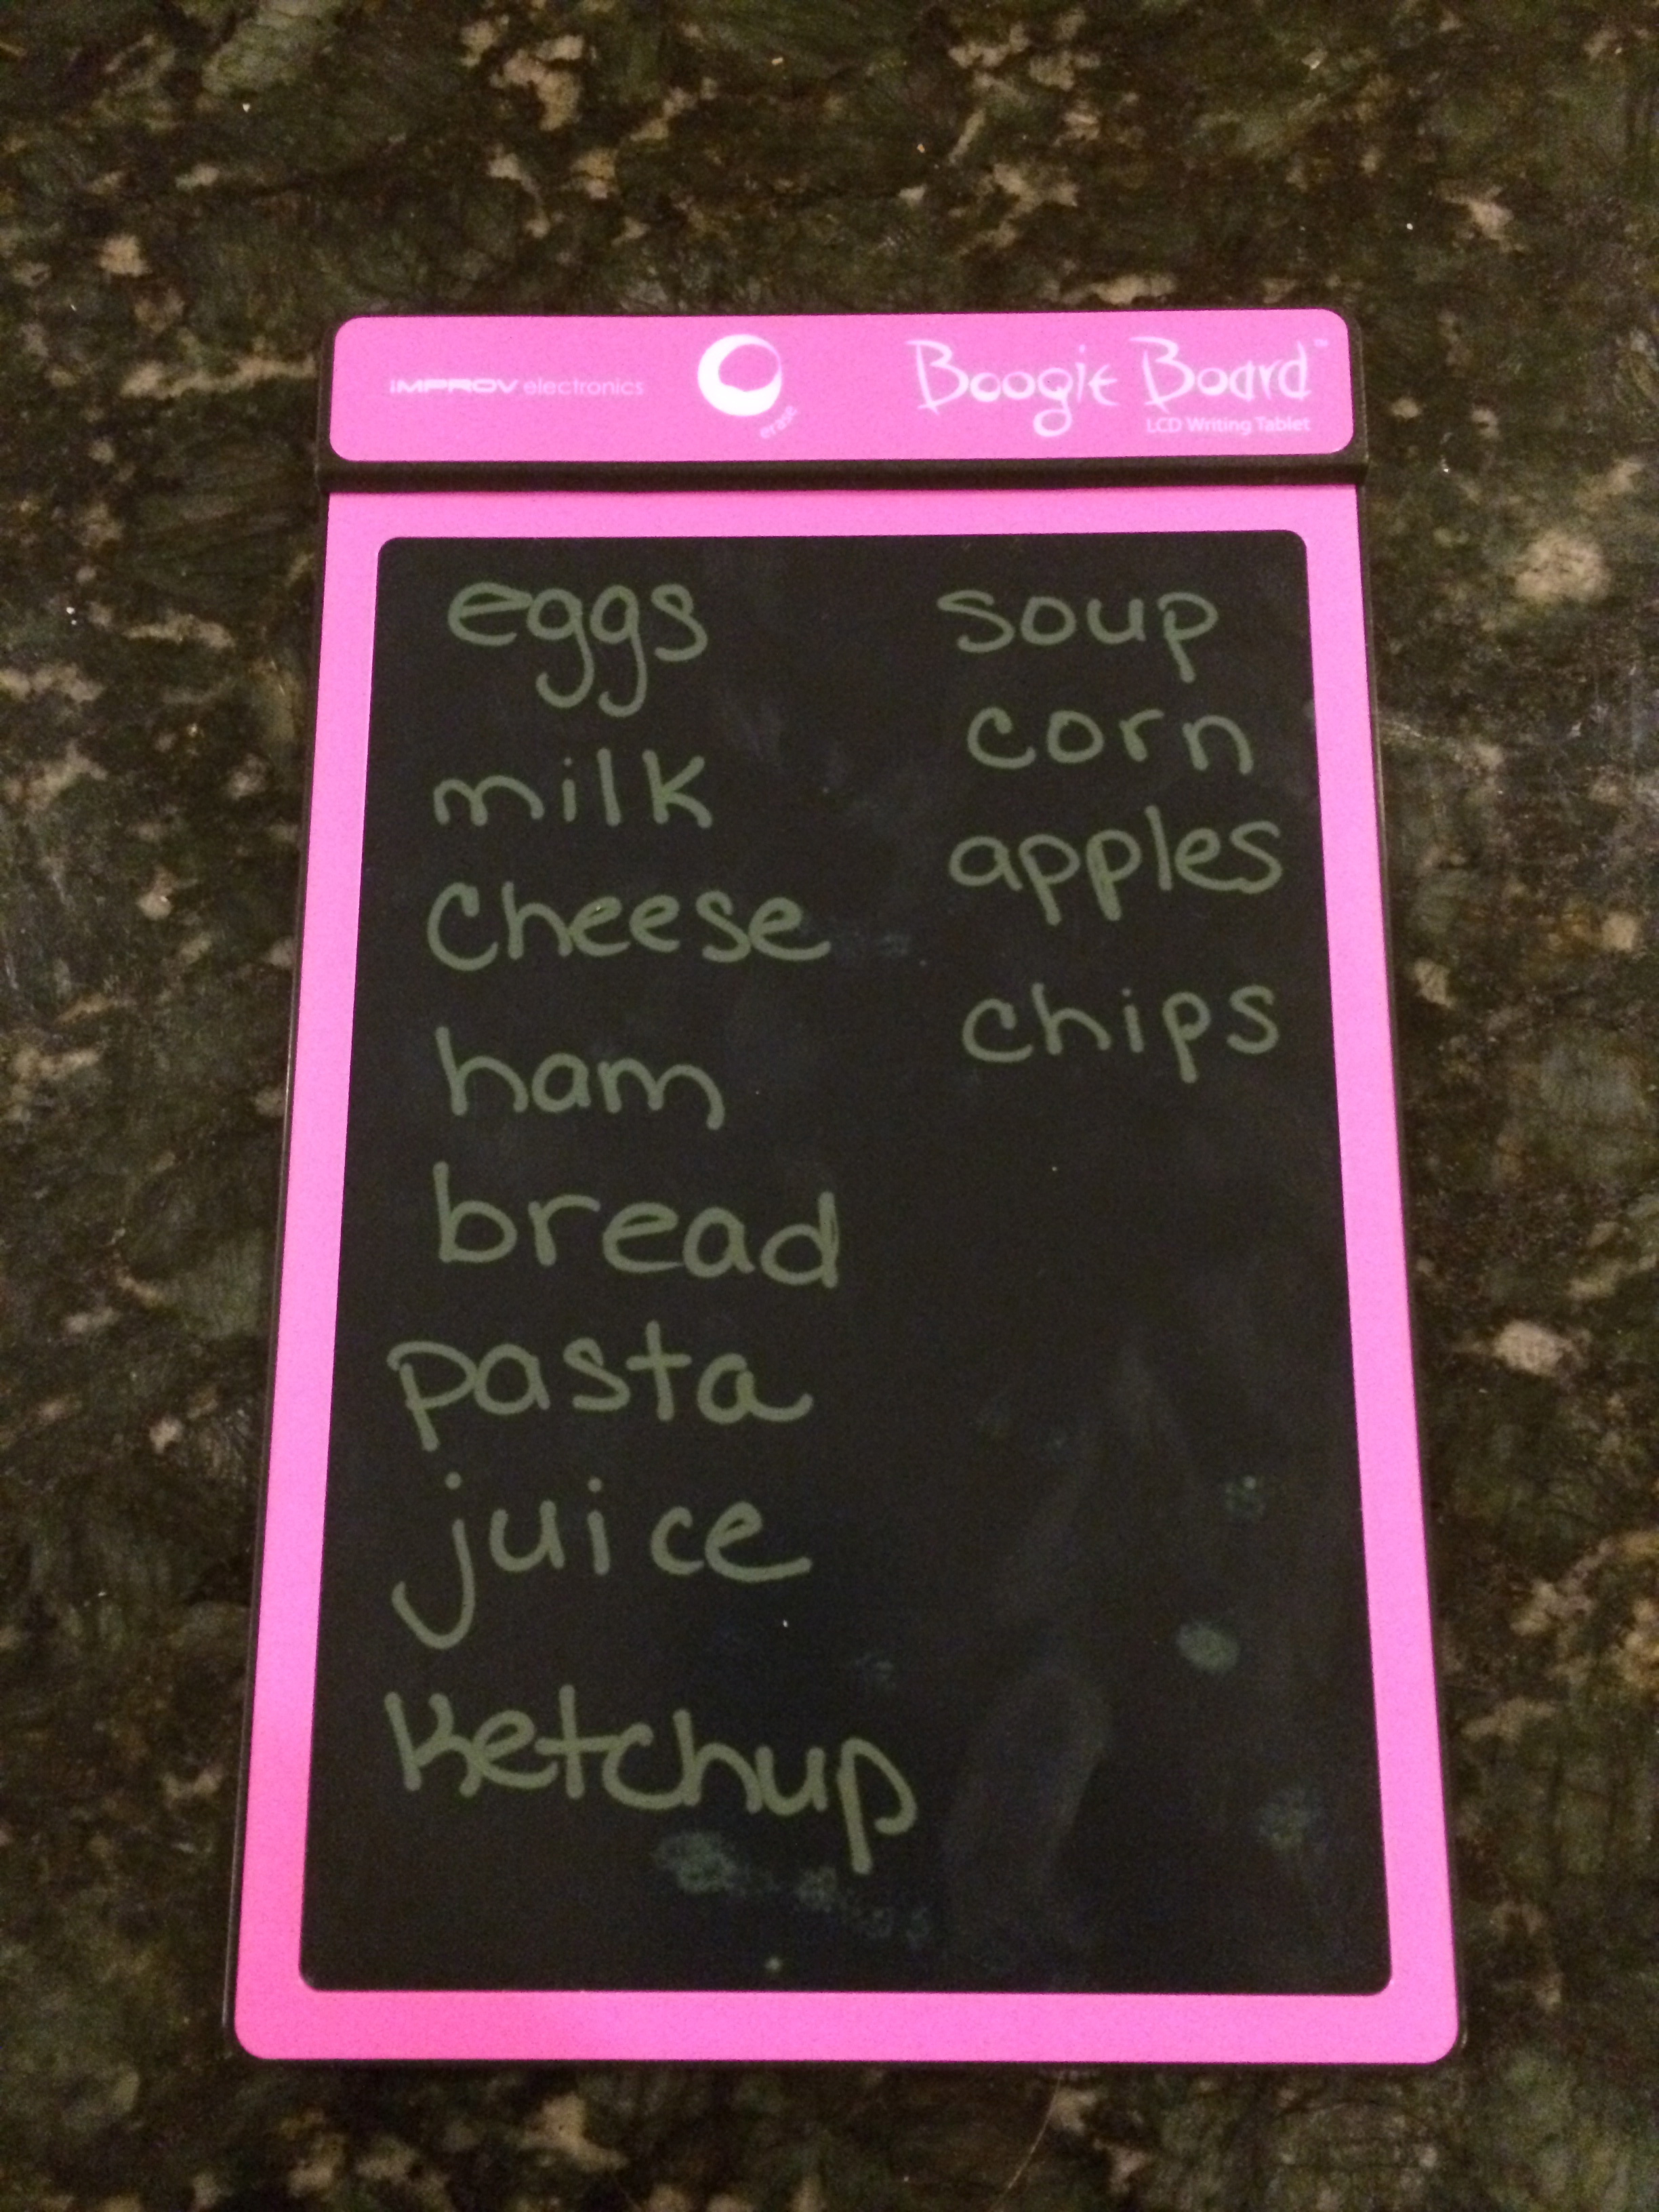 Not only can you use the Boogie Board to keep your shopping list, your kids can hold in the cart and help check things off as you find them!